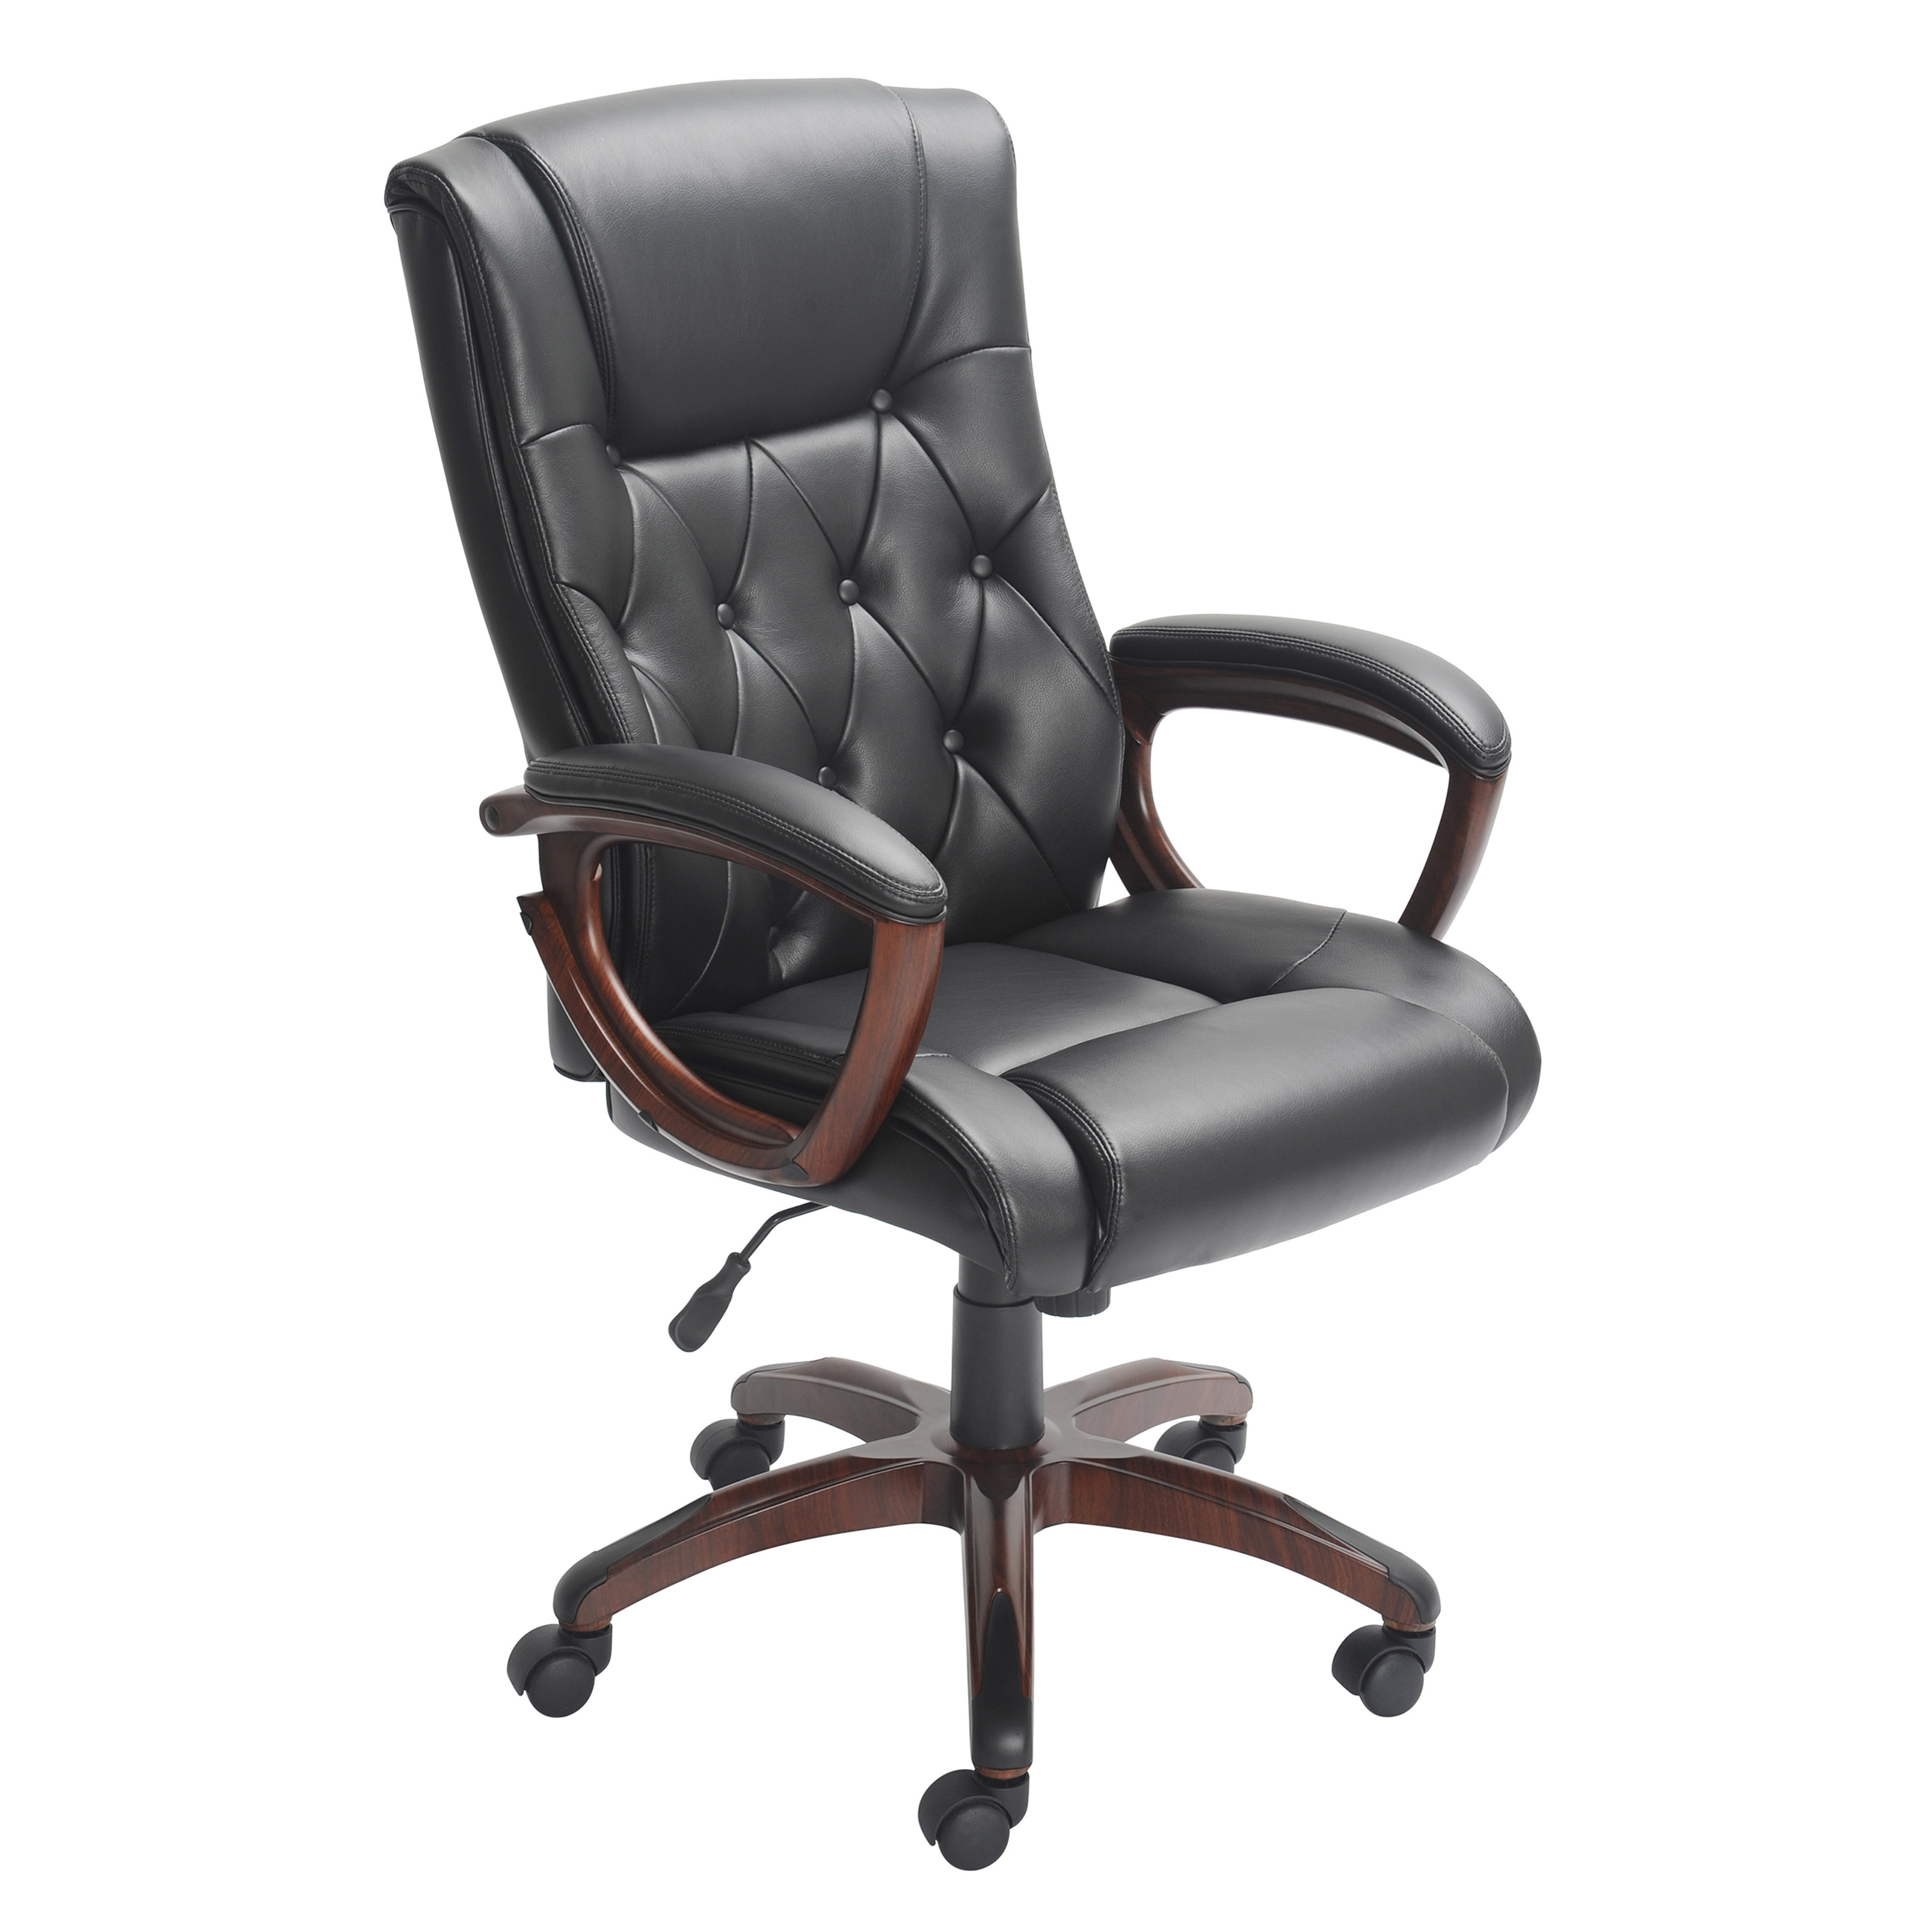 Better Homes and Gardens Executive, Mid-Back Manager's Office Chair with Arms, Black Bonded Leather - image 2 of 9